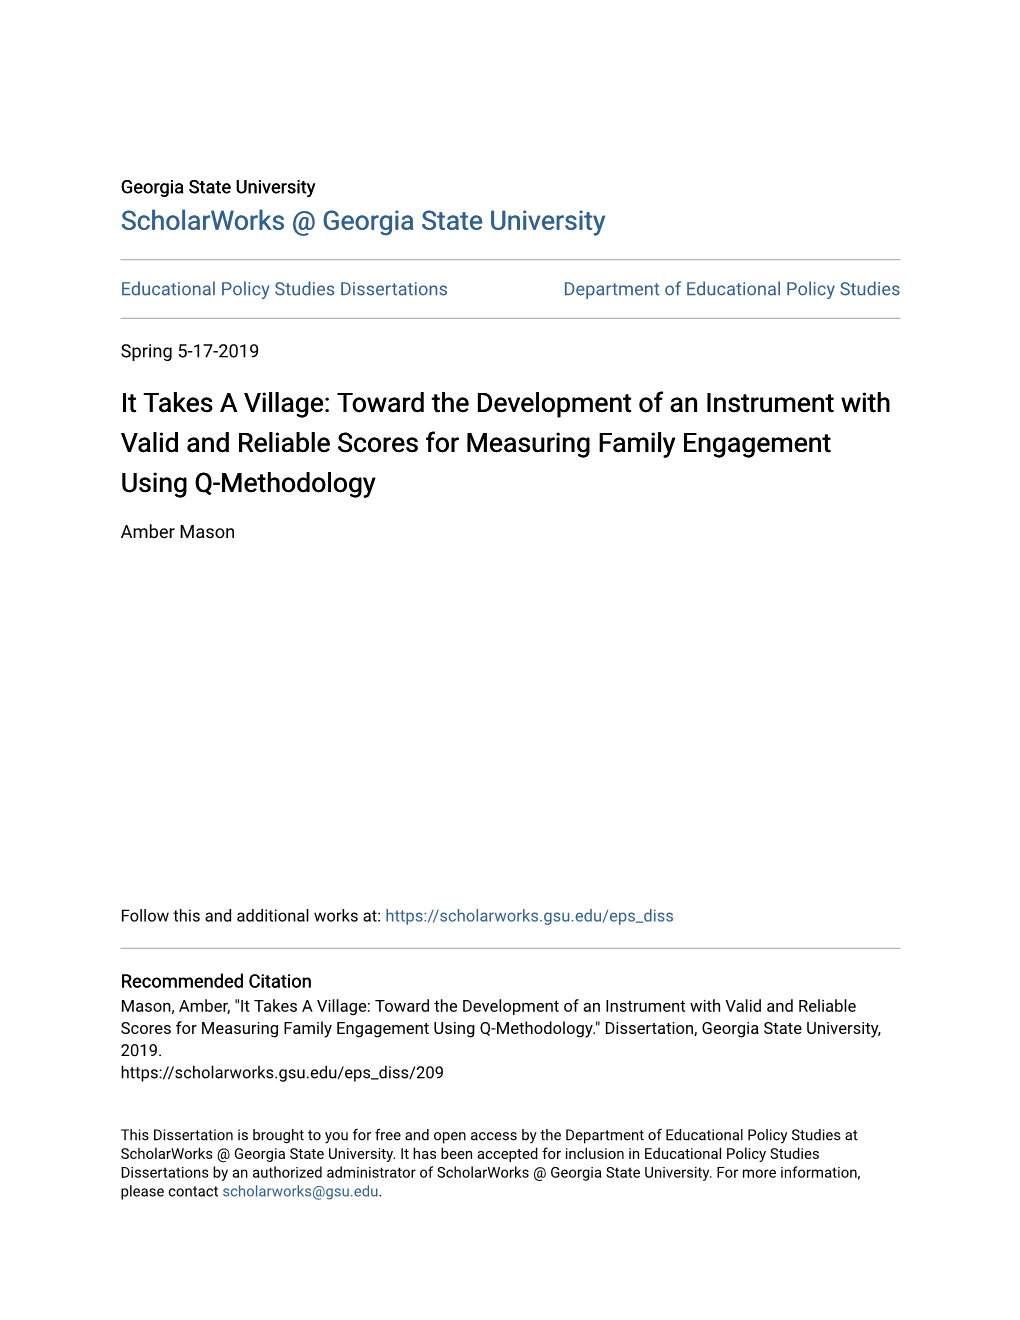 Toward the Development of an Instrument with Valid and Reliable Scores for Measuring Family Engagement Using Q-Methodology